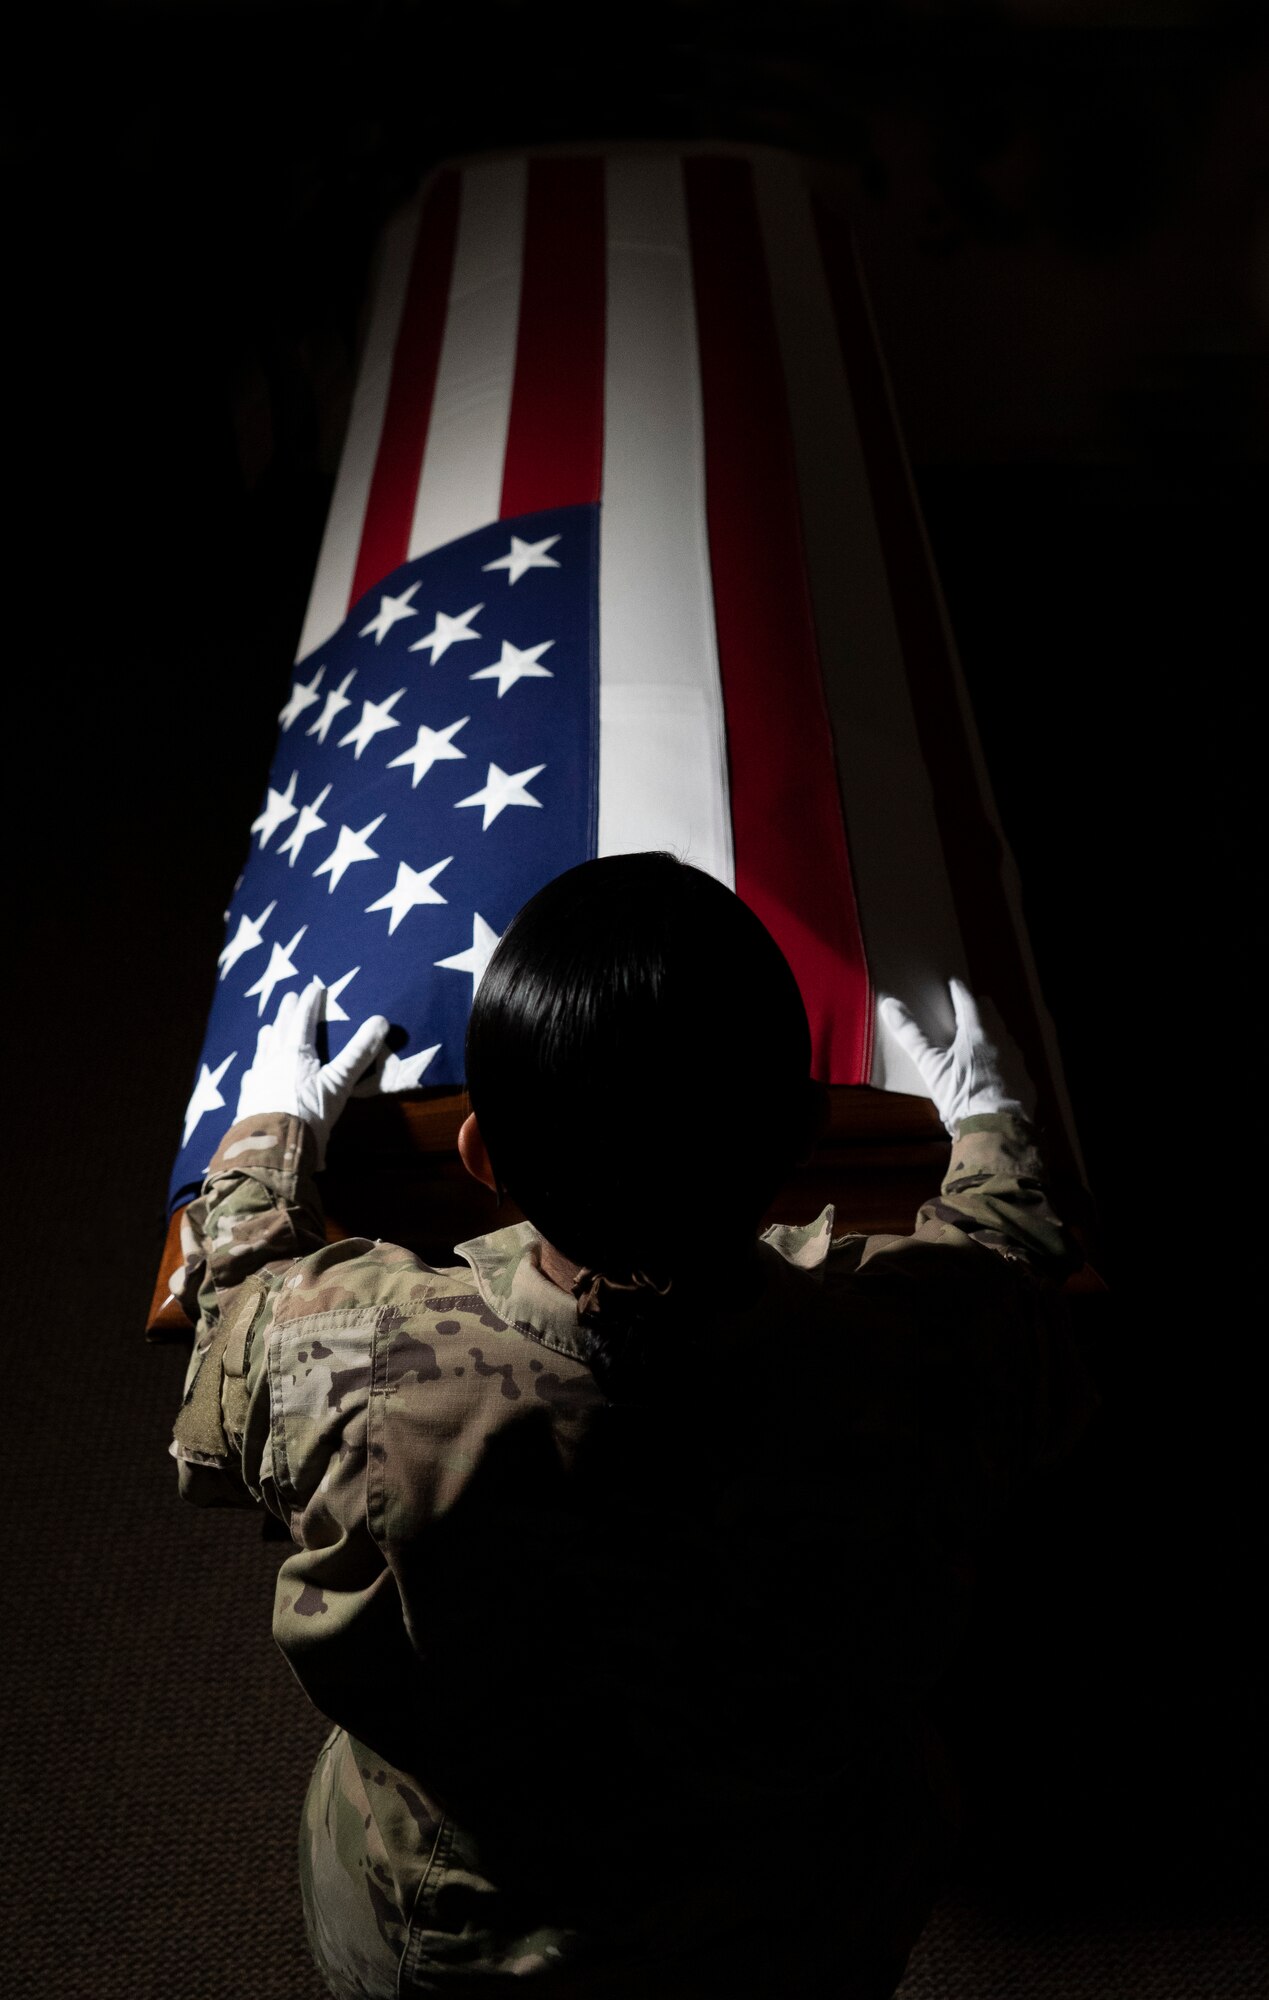 An Airman stands over a casket with a flag over it.